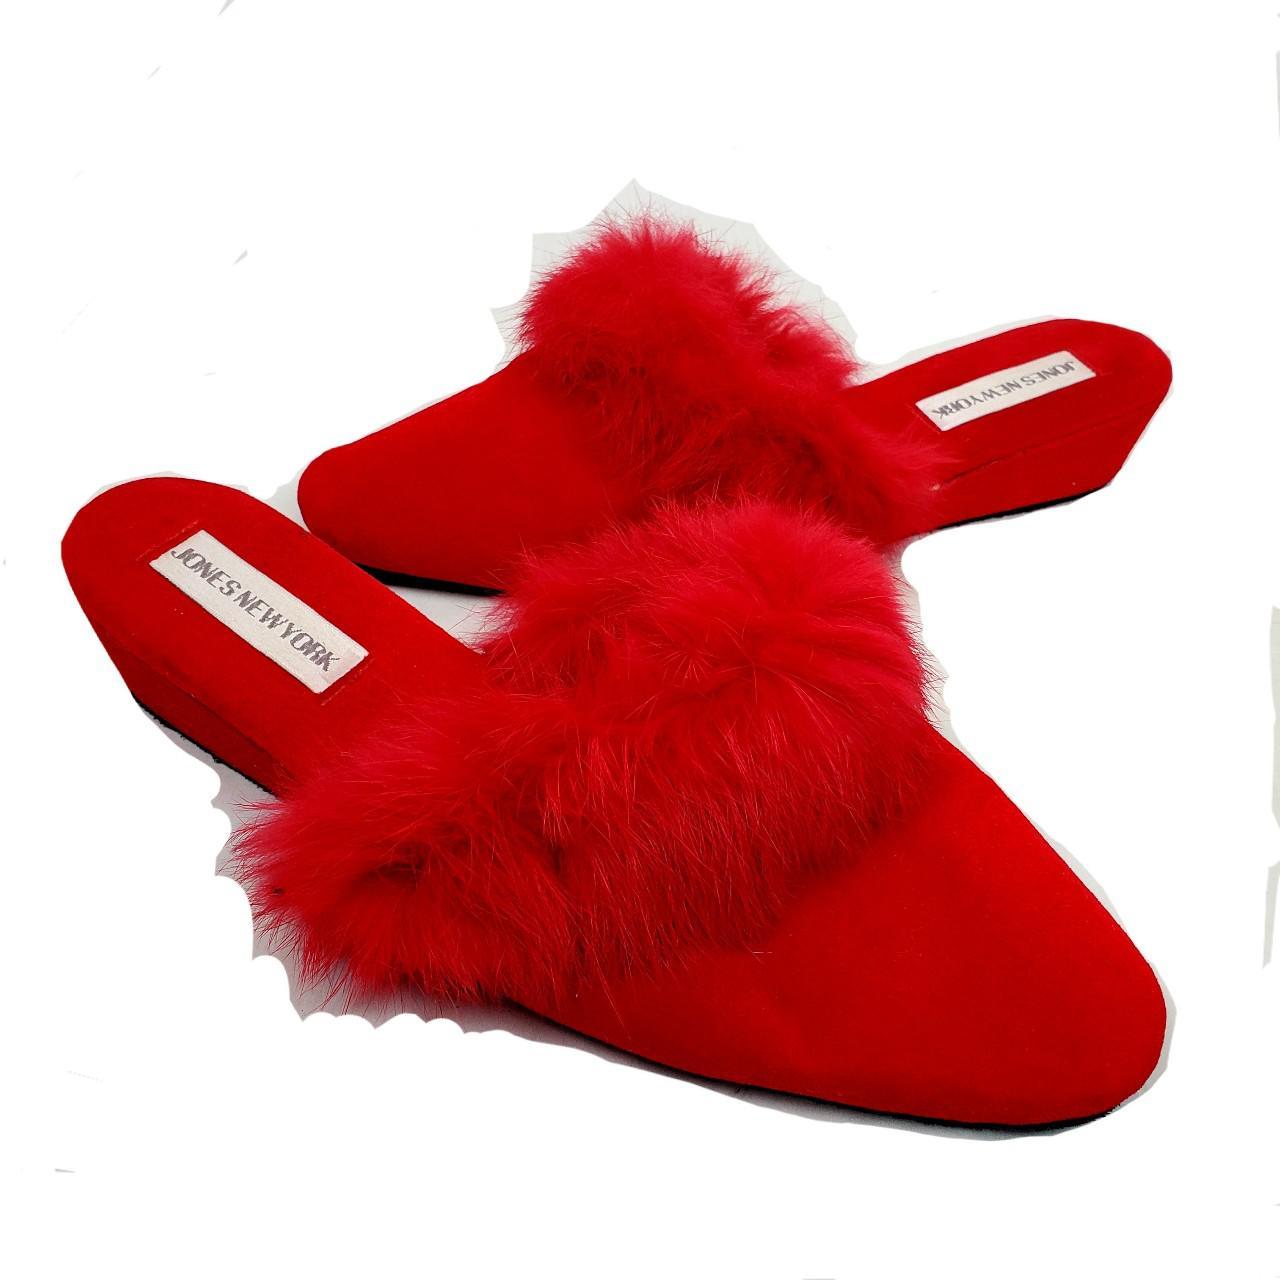 Product Image 1 - Rabbit hair red slippers. 

Tell